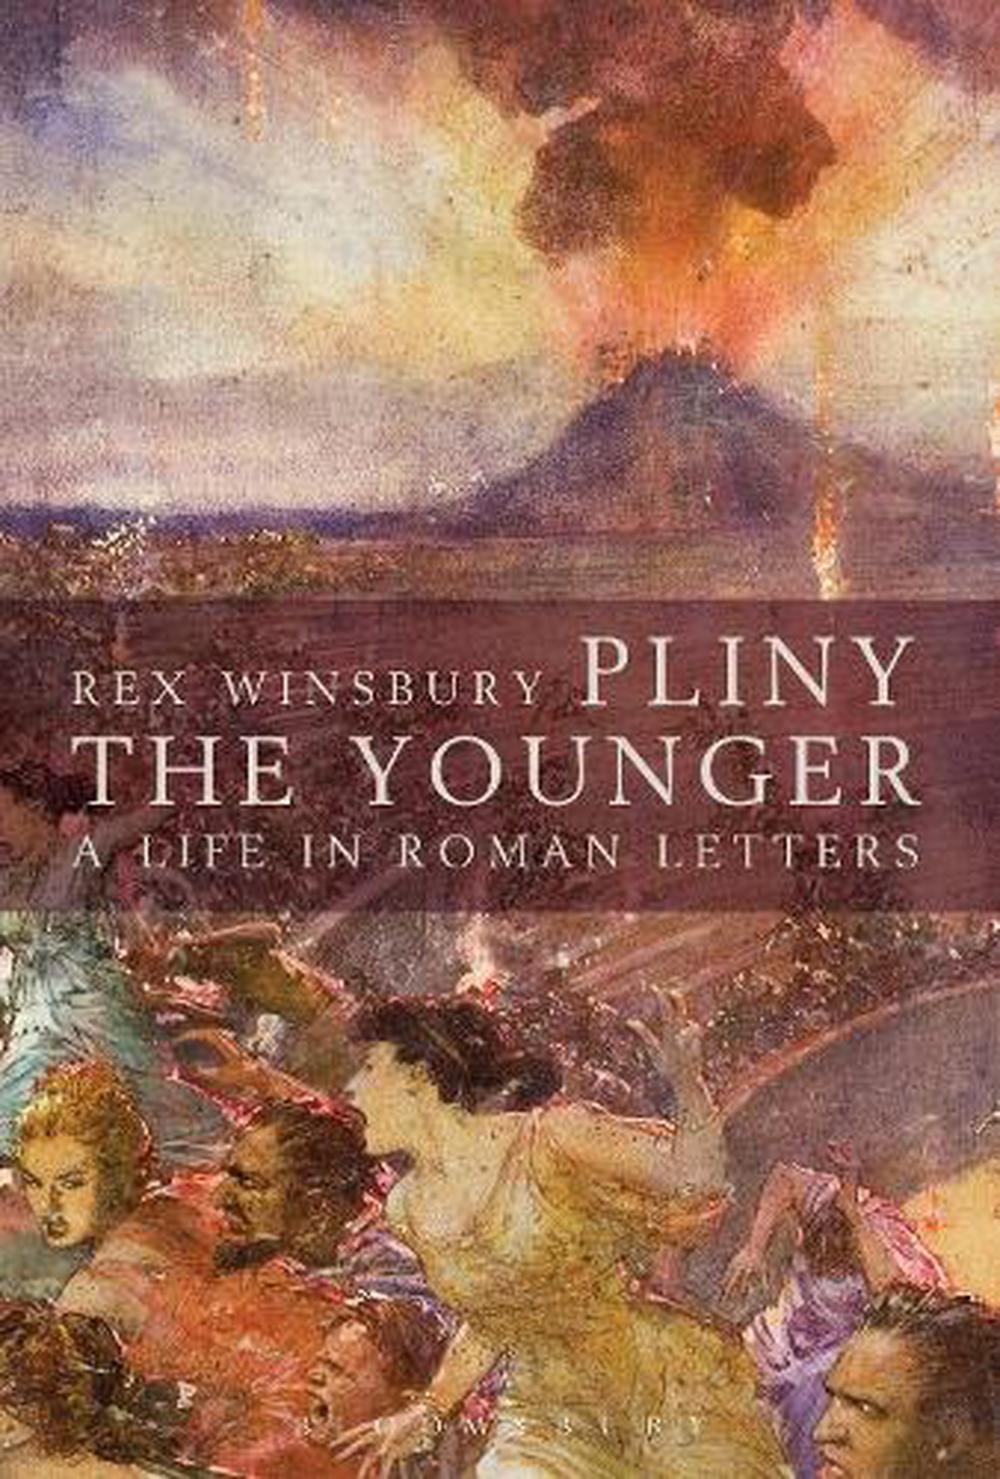 Pliny the Younger A Life in Roman Letters by Rex Winsbury (English